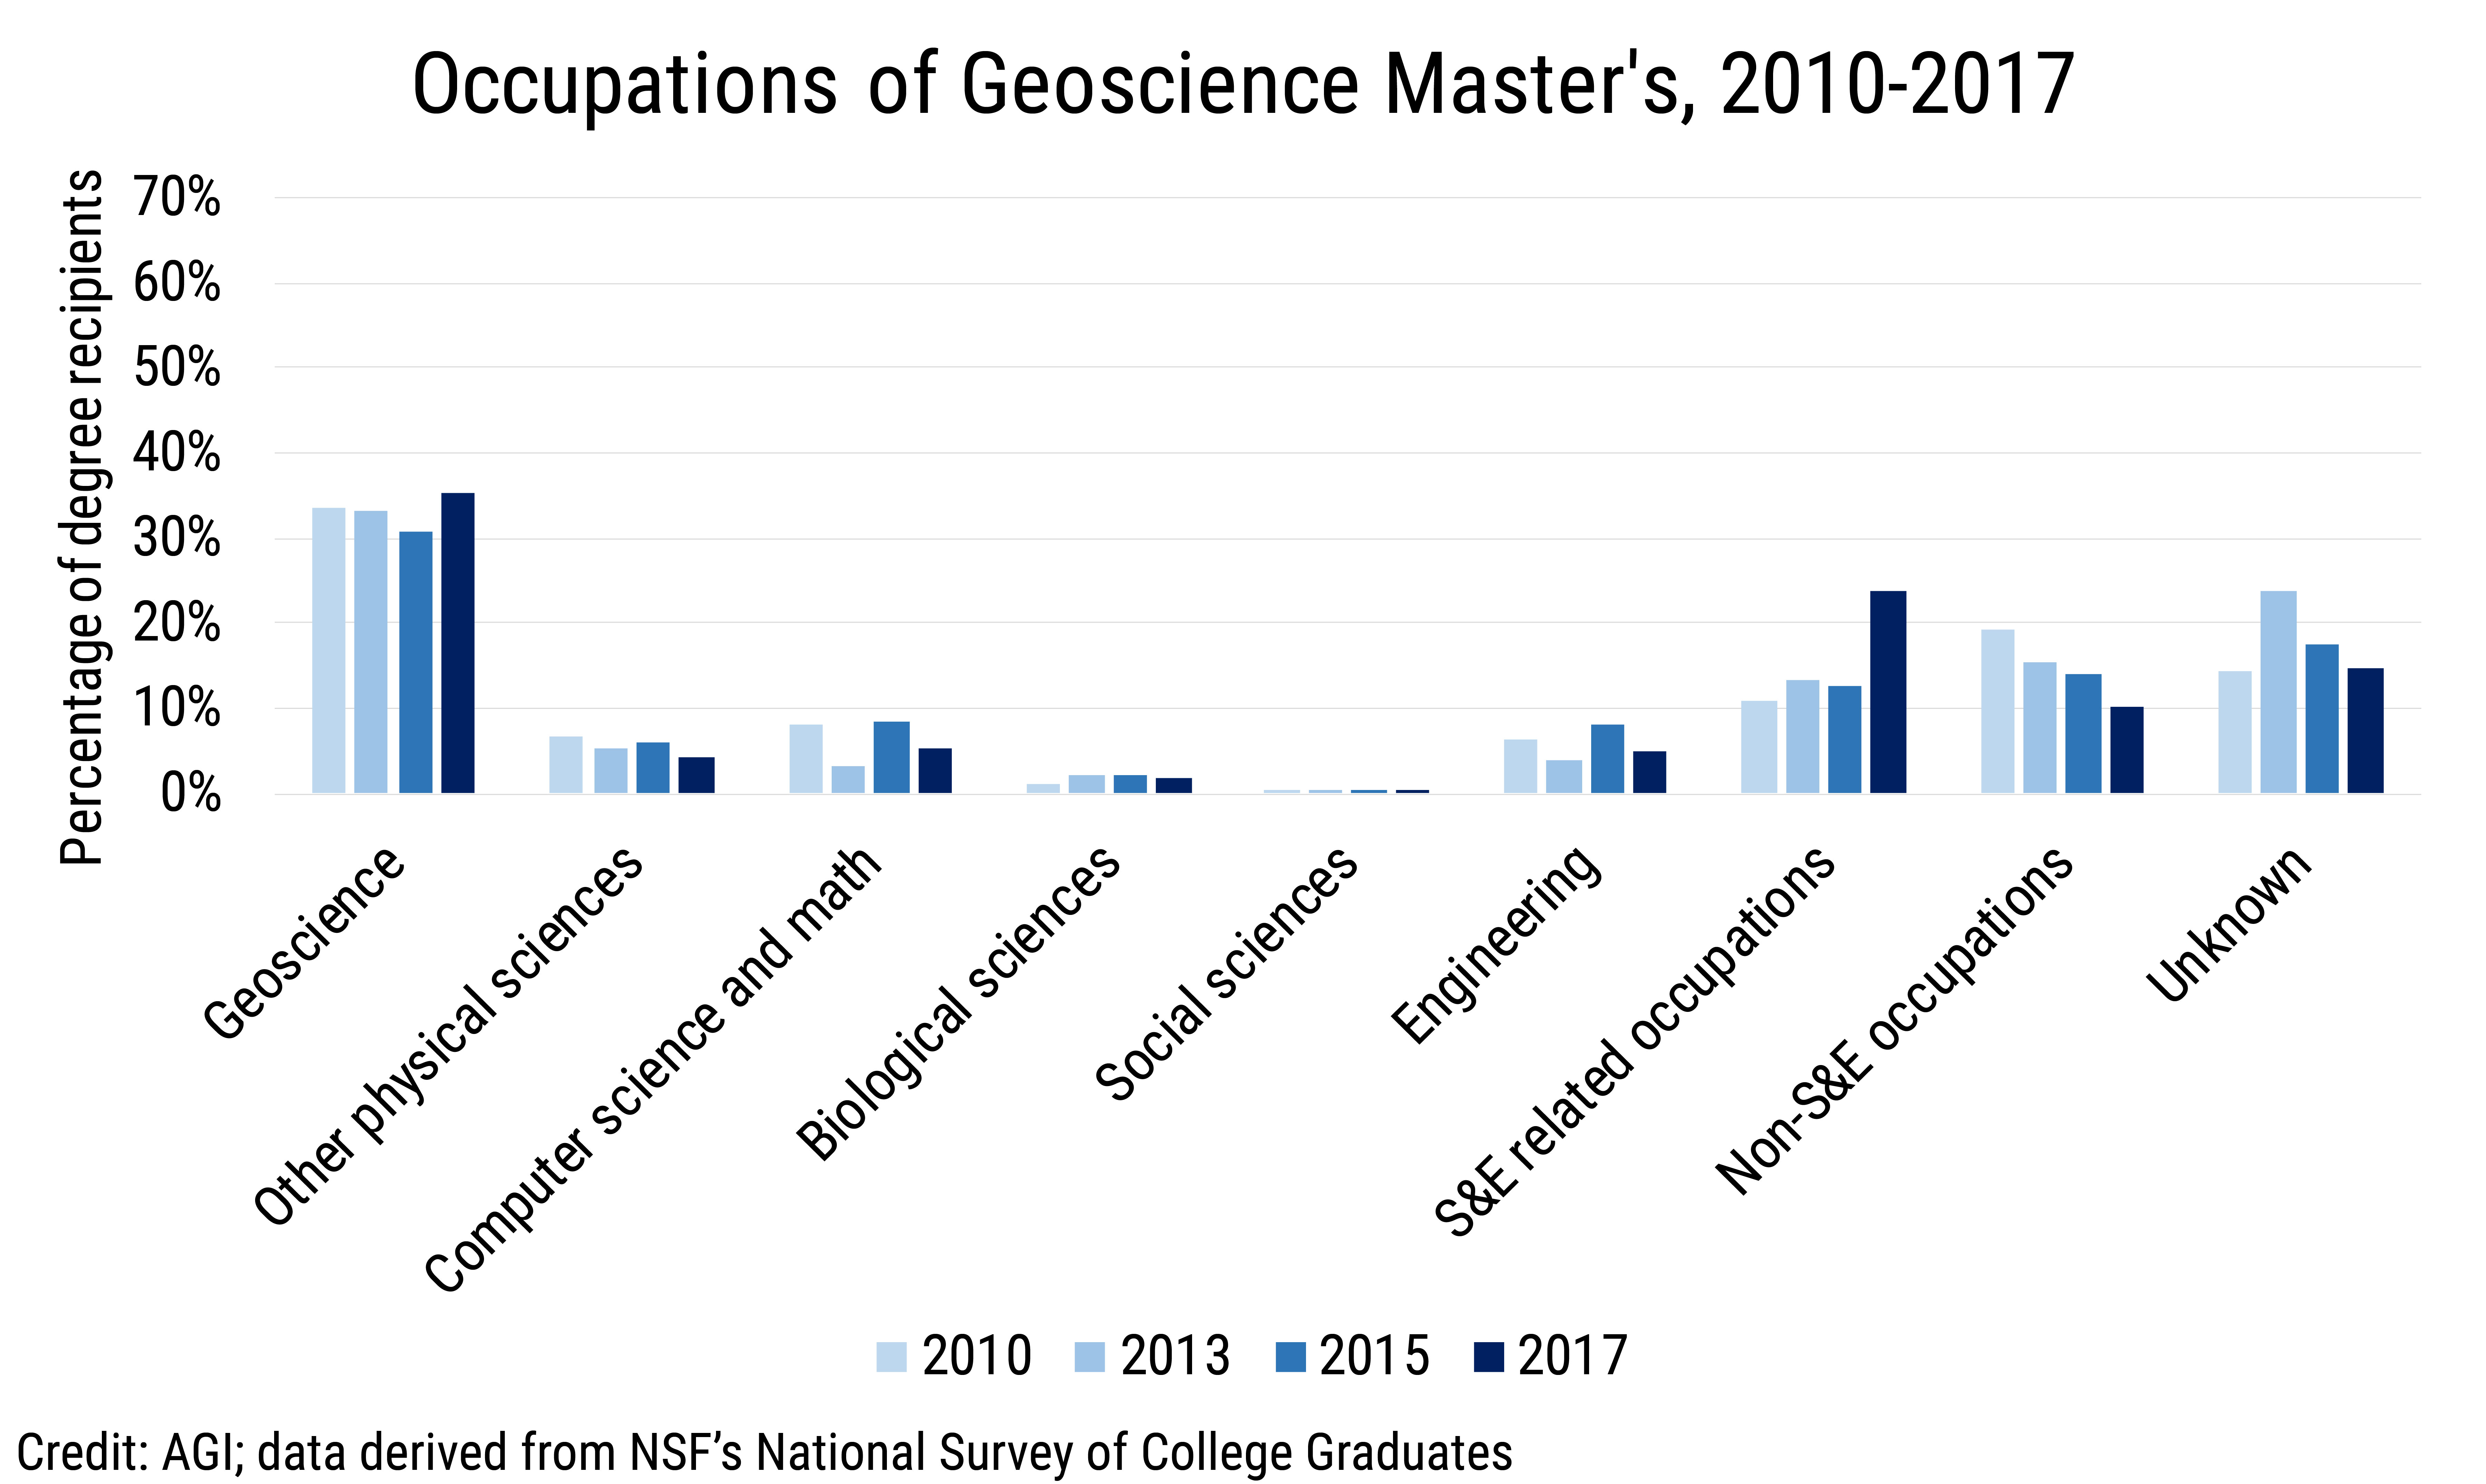 Data Brief 2019-014 chart 02: Occupations of Geoscience Master's, 2010-2017 (credit: AGI; data derived from NSF NSCG)